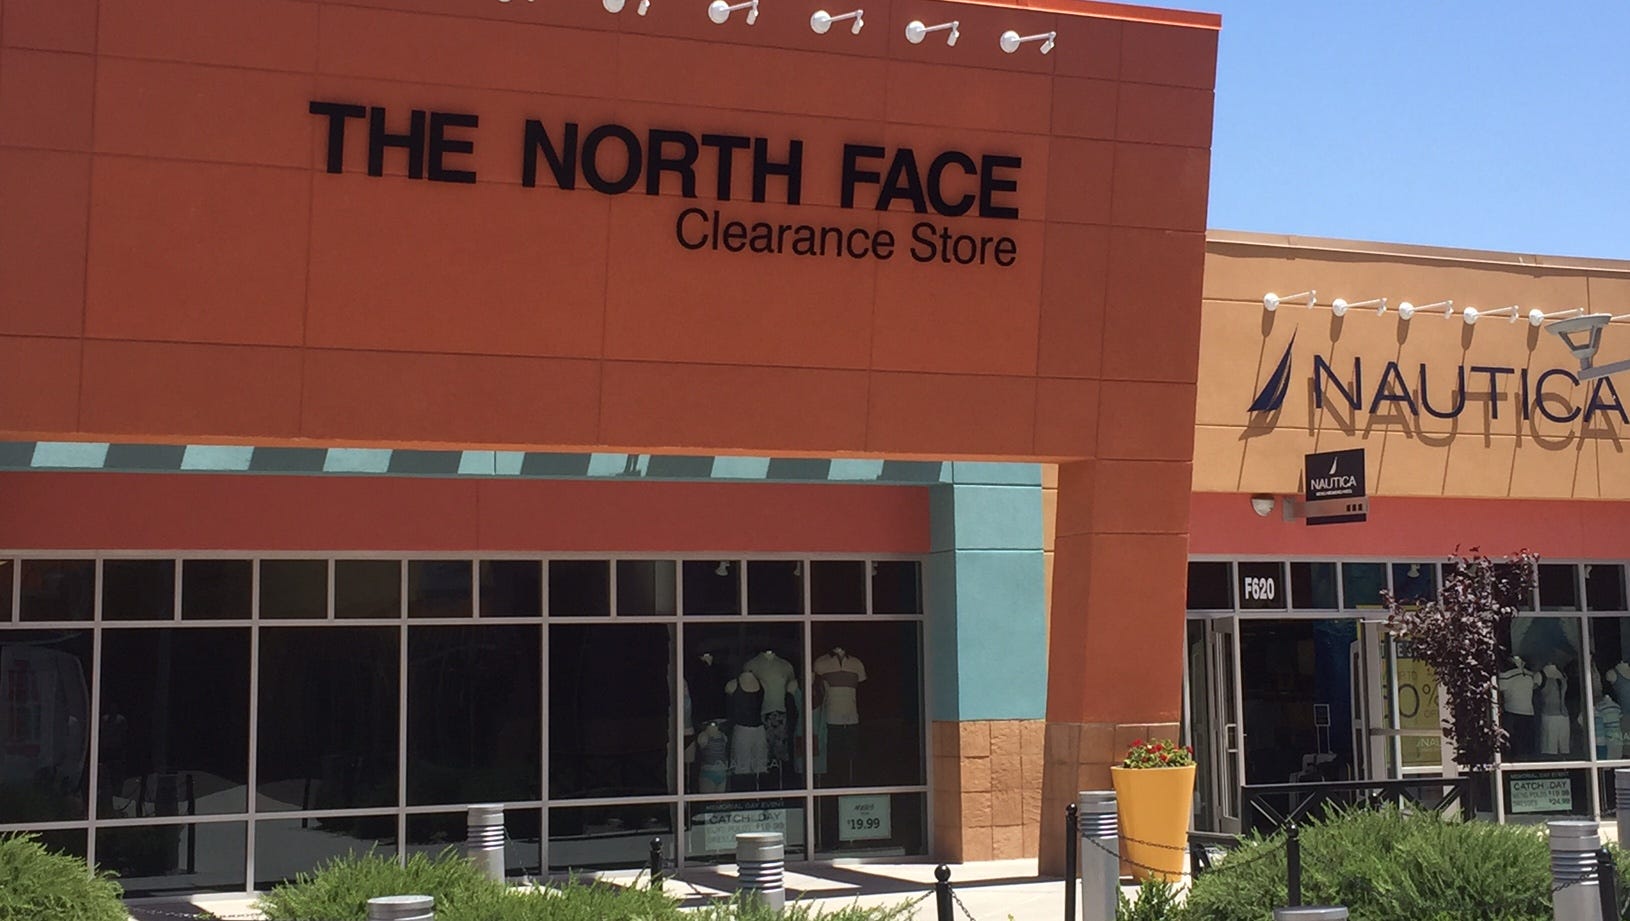 North Face opens outlet clearance store